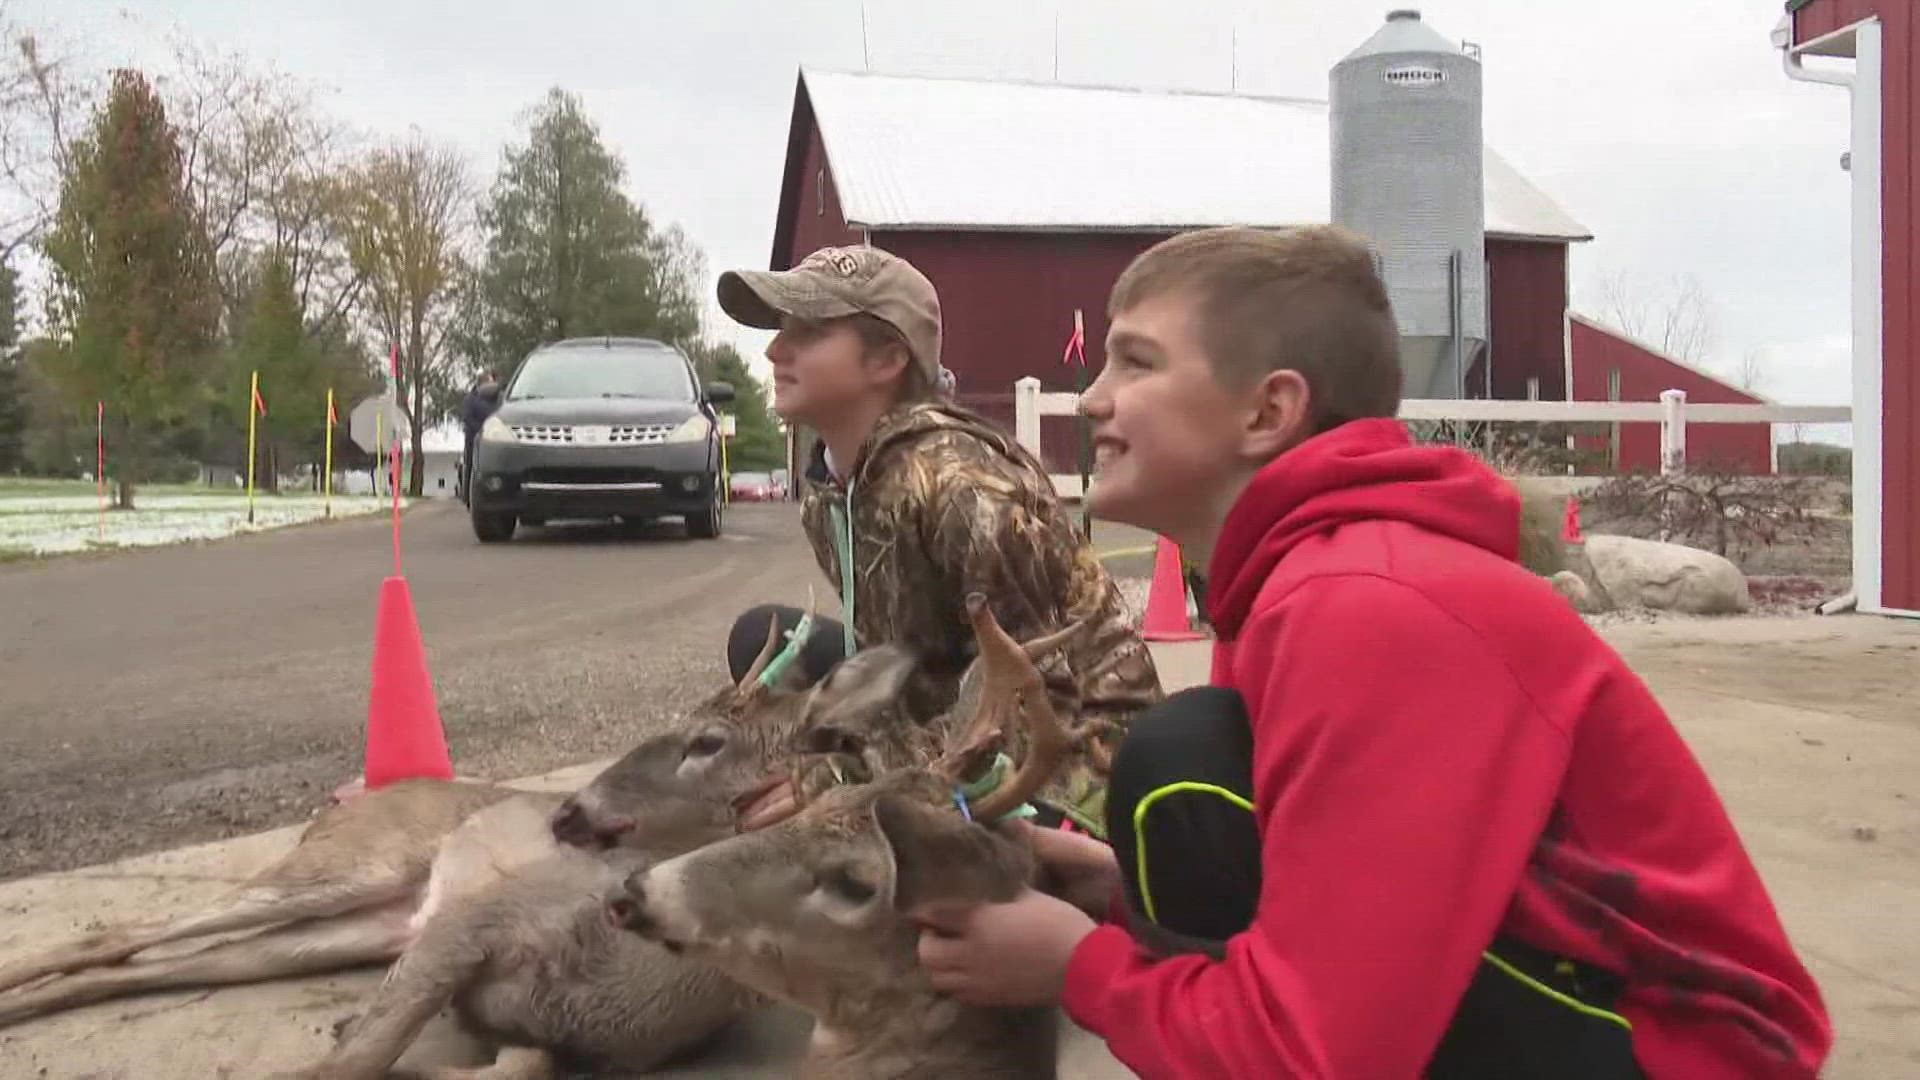 Starting this deer season, hunters in Michigan will be required to report killing a deer within 72 hours.